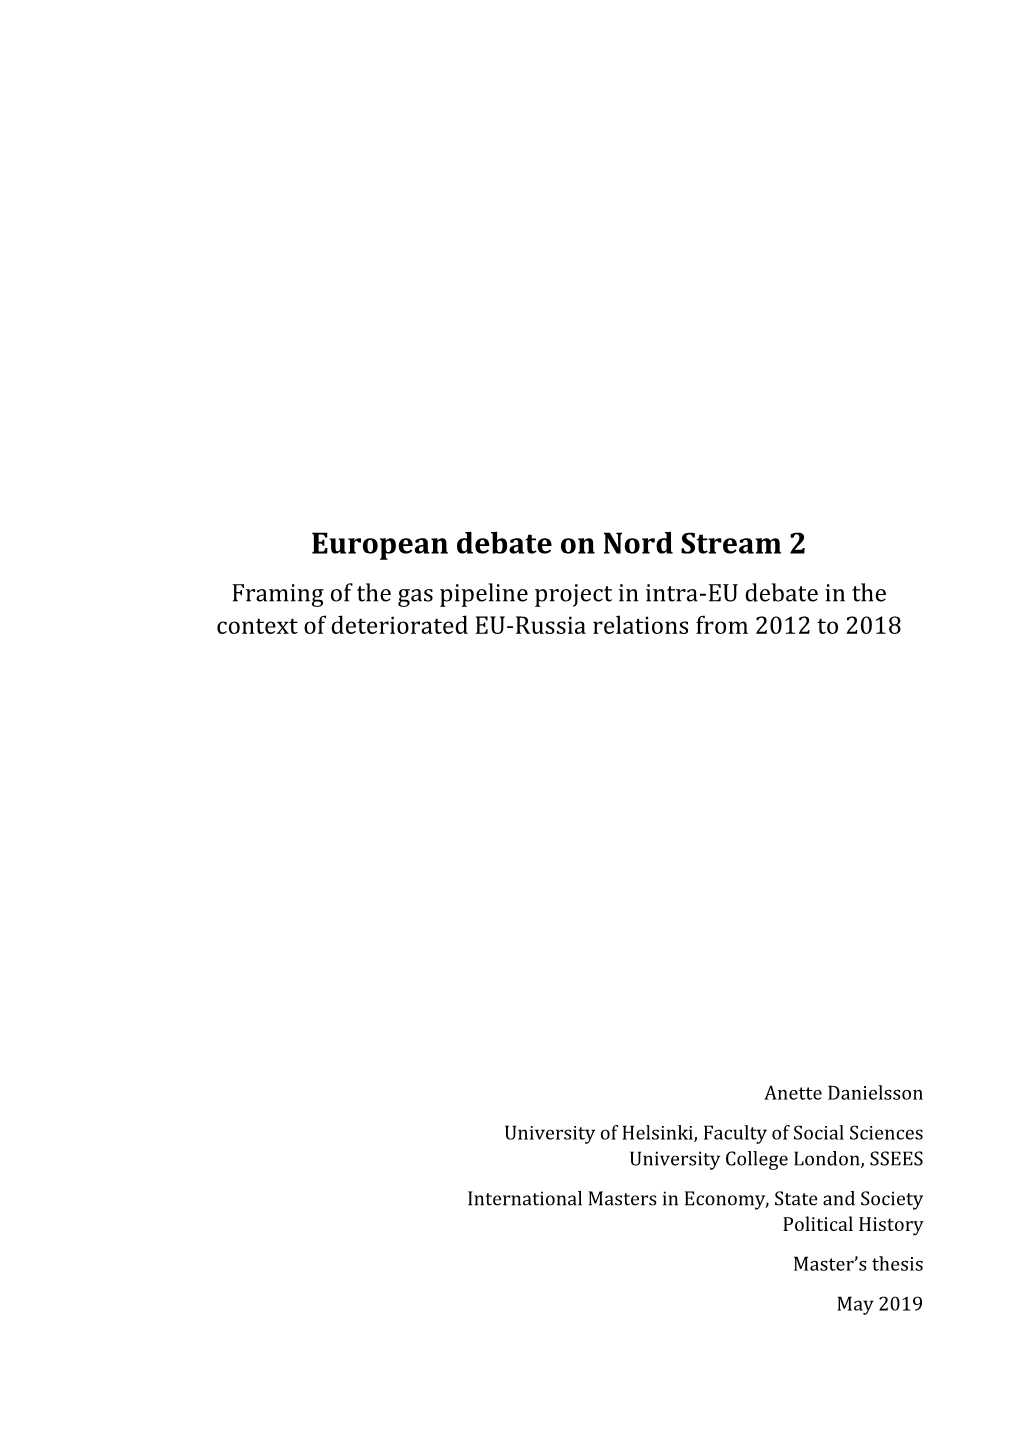 European Debate on Nord Stream 2 Framing of the Gas Pipeline Project in Intra-EU Debate in the Context of Deteriorated EU-Russia Relations from 2012 to 2018